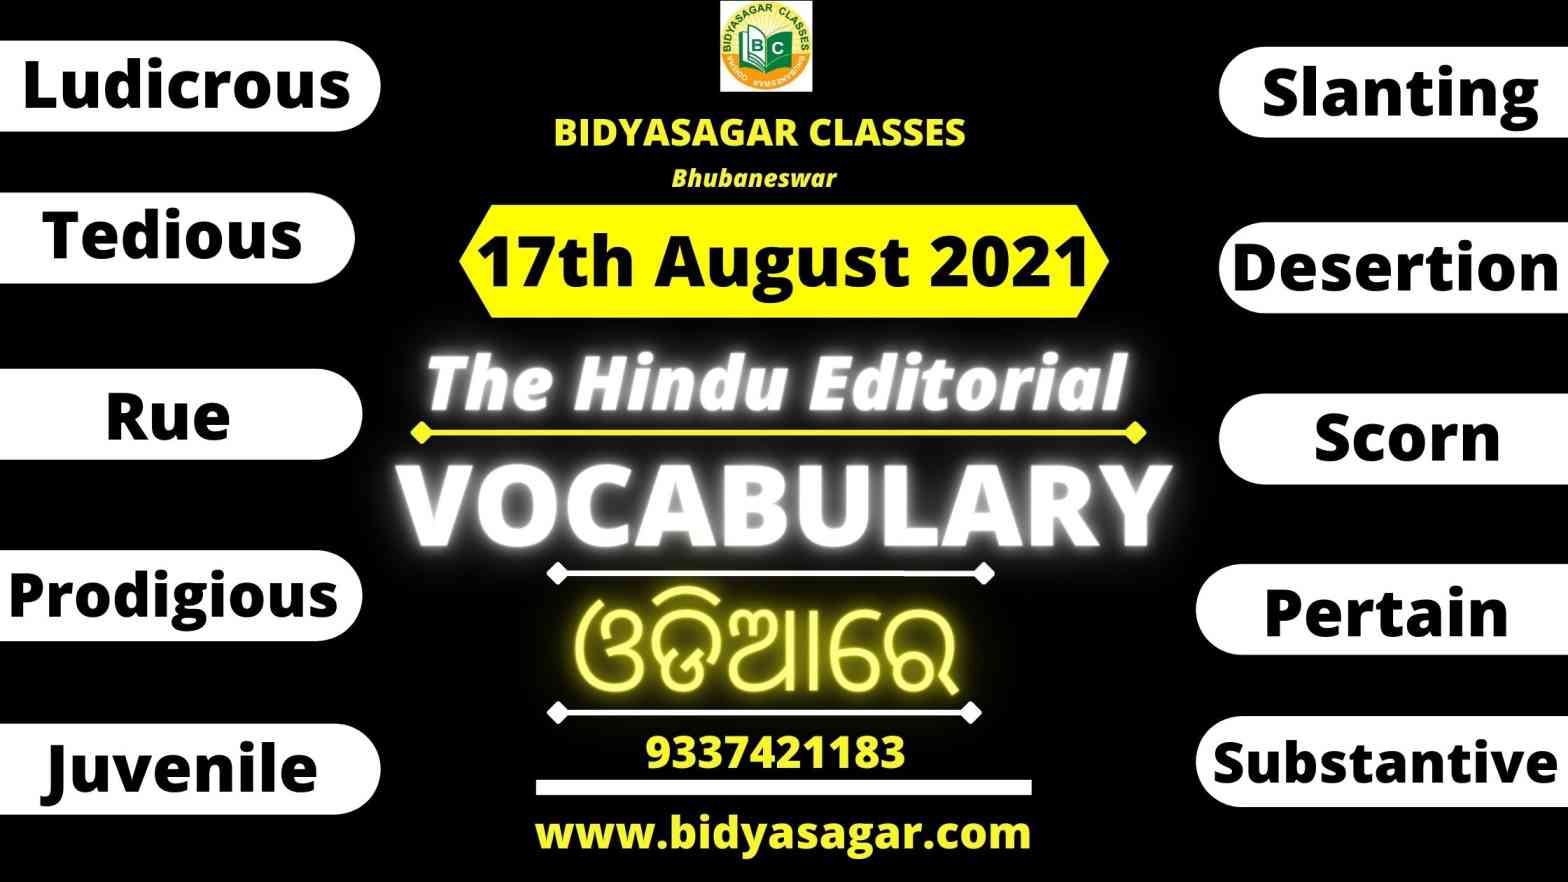 The Hindu Editorial Vocabulary of 17th August 2021